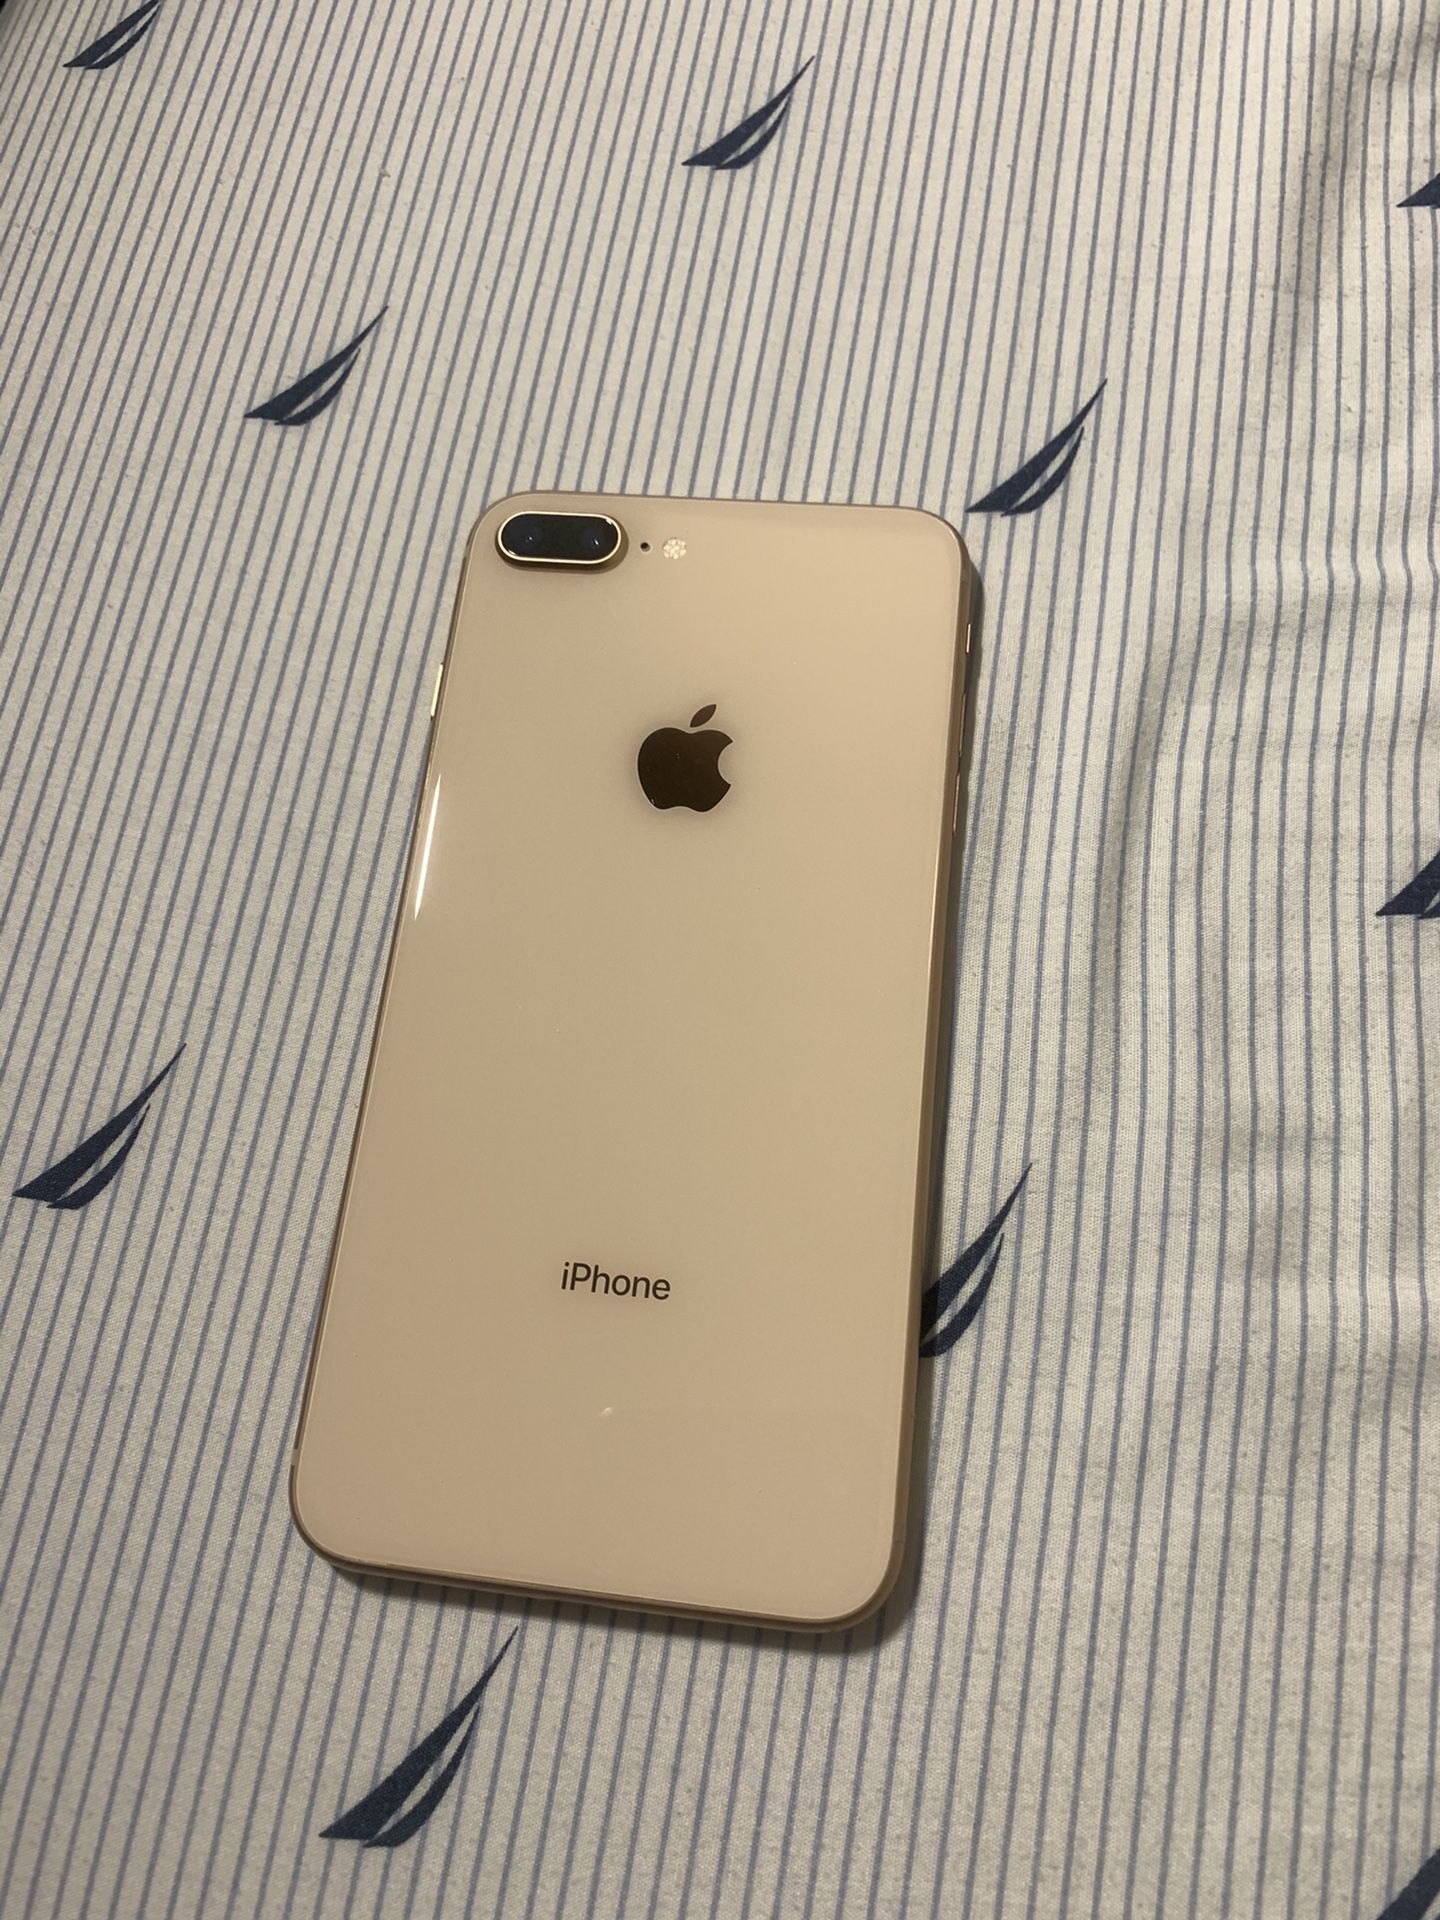 iPhone 8 Plus 64GB Unlocked for any carrier